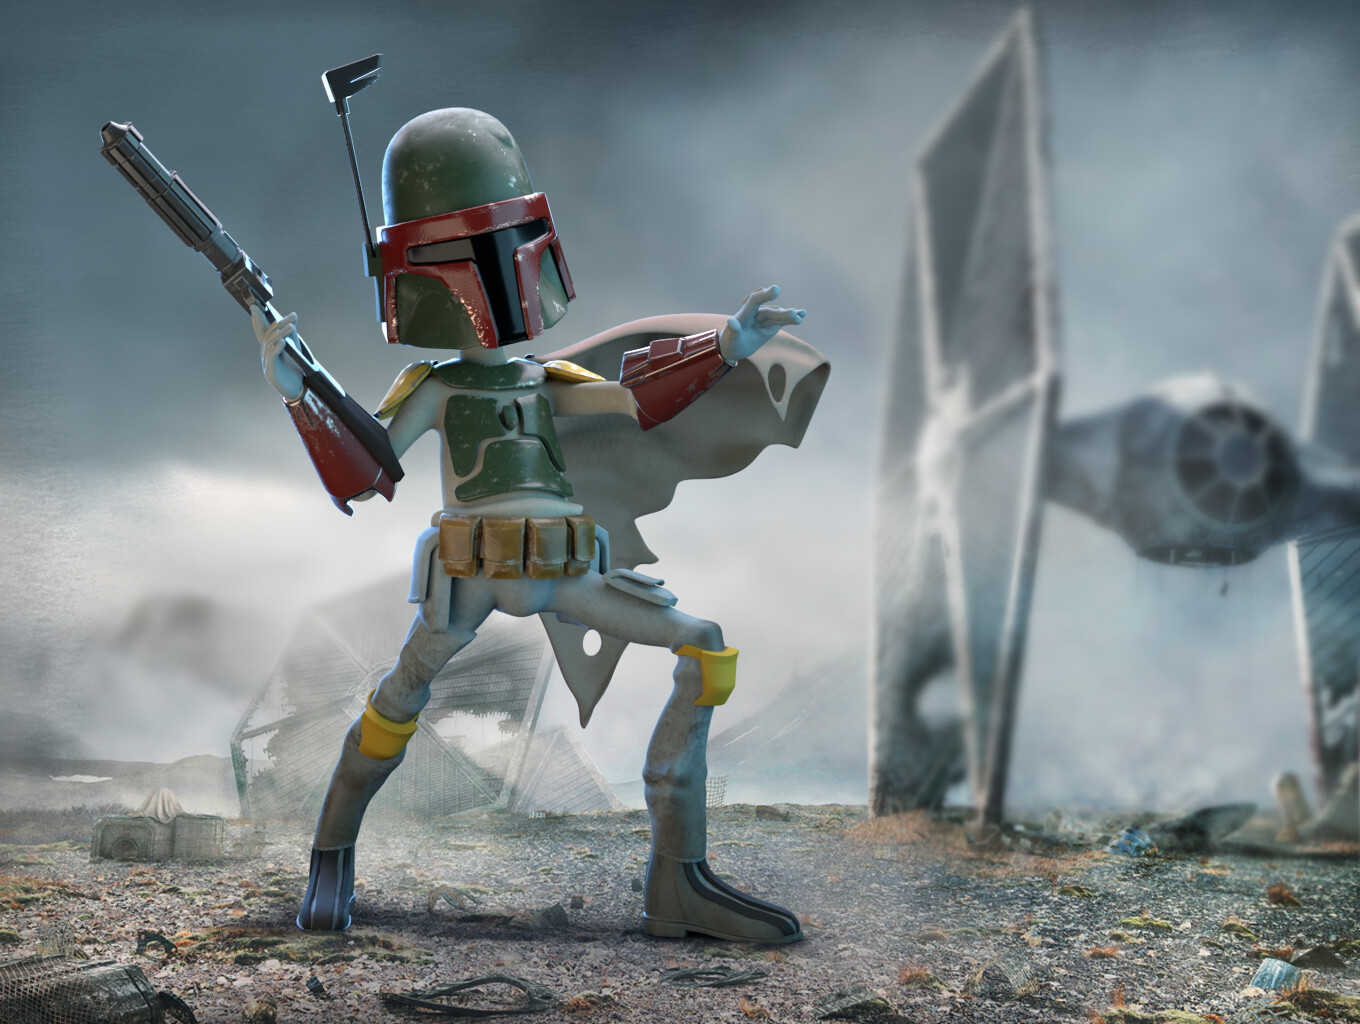 "Boba Fett" charater charater